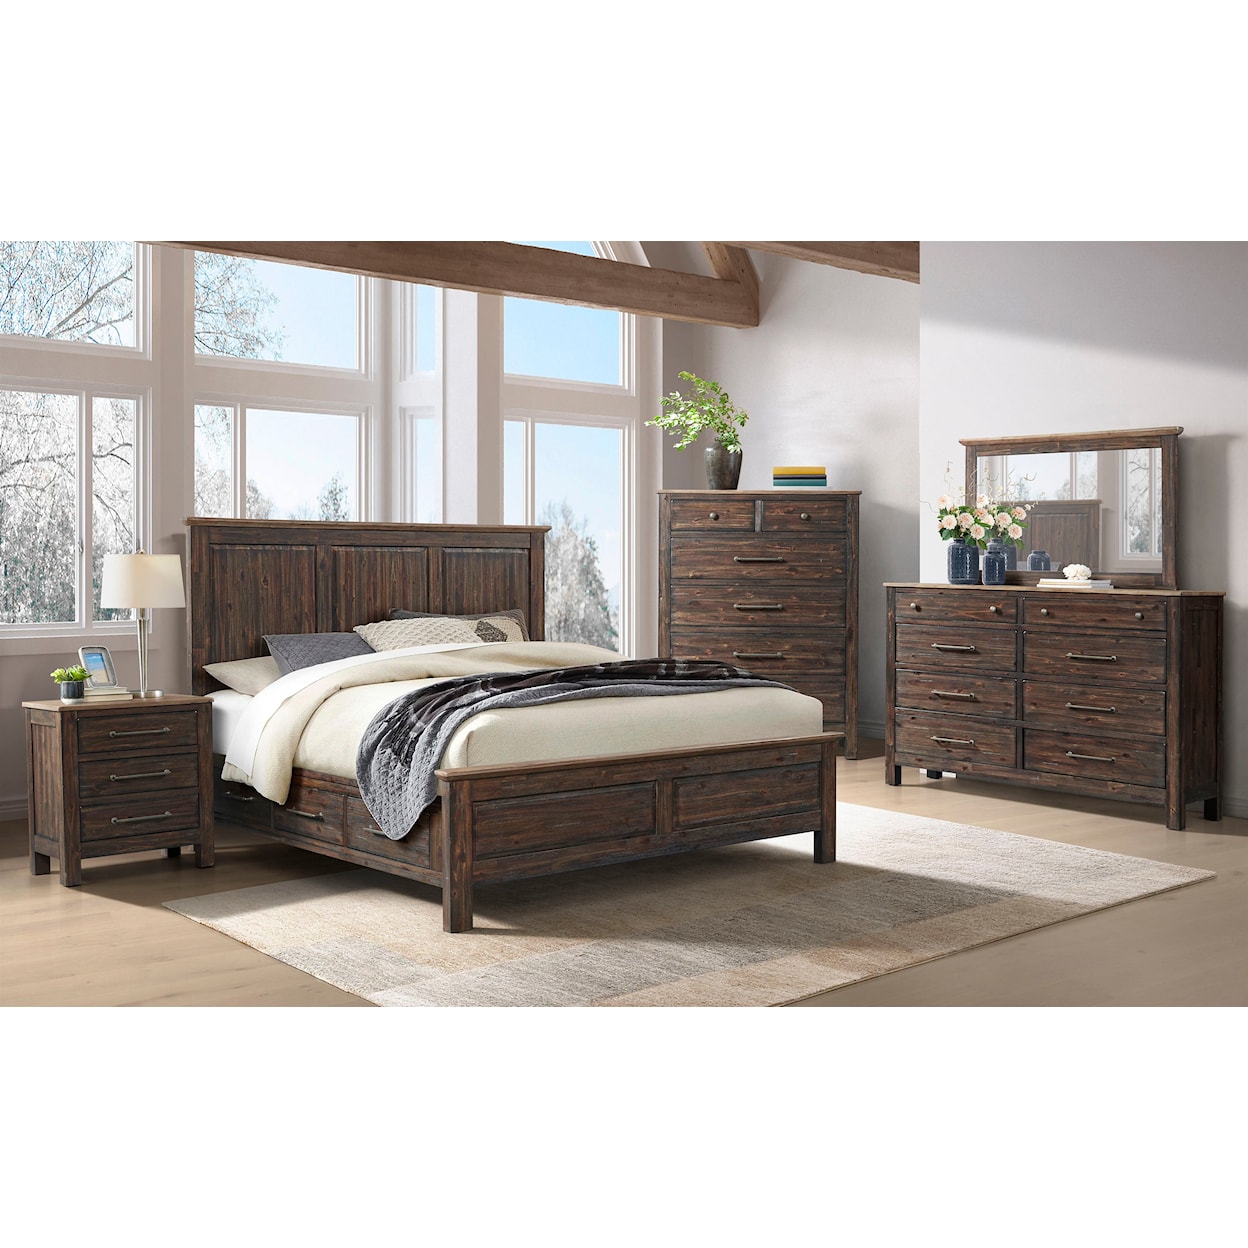 Intercon Transitions King Panel Bed